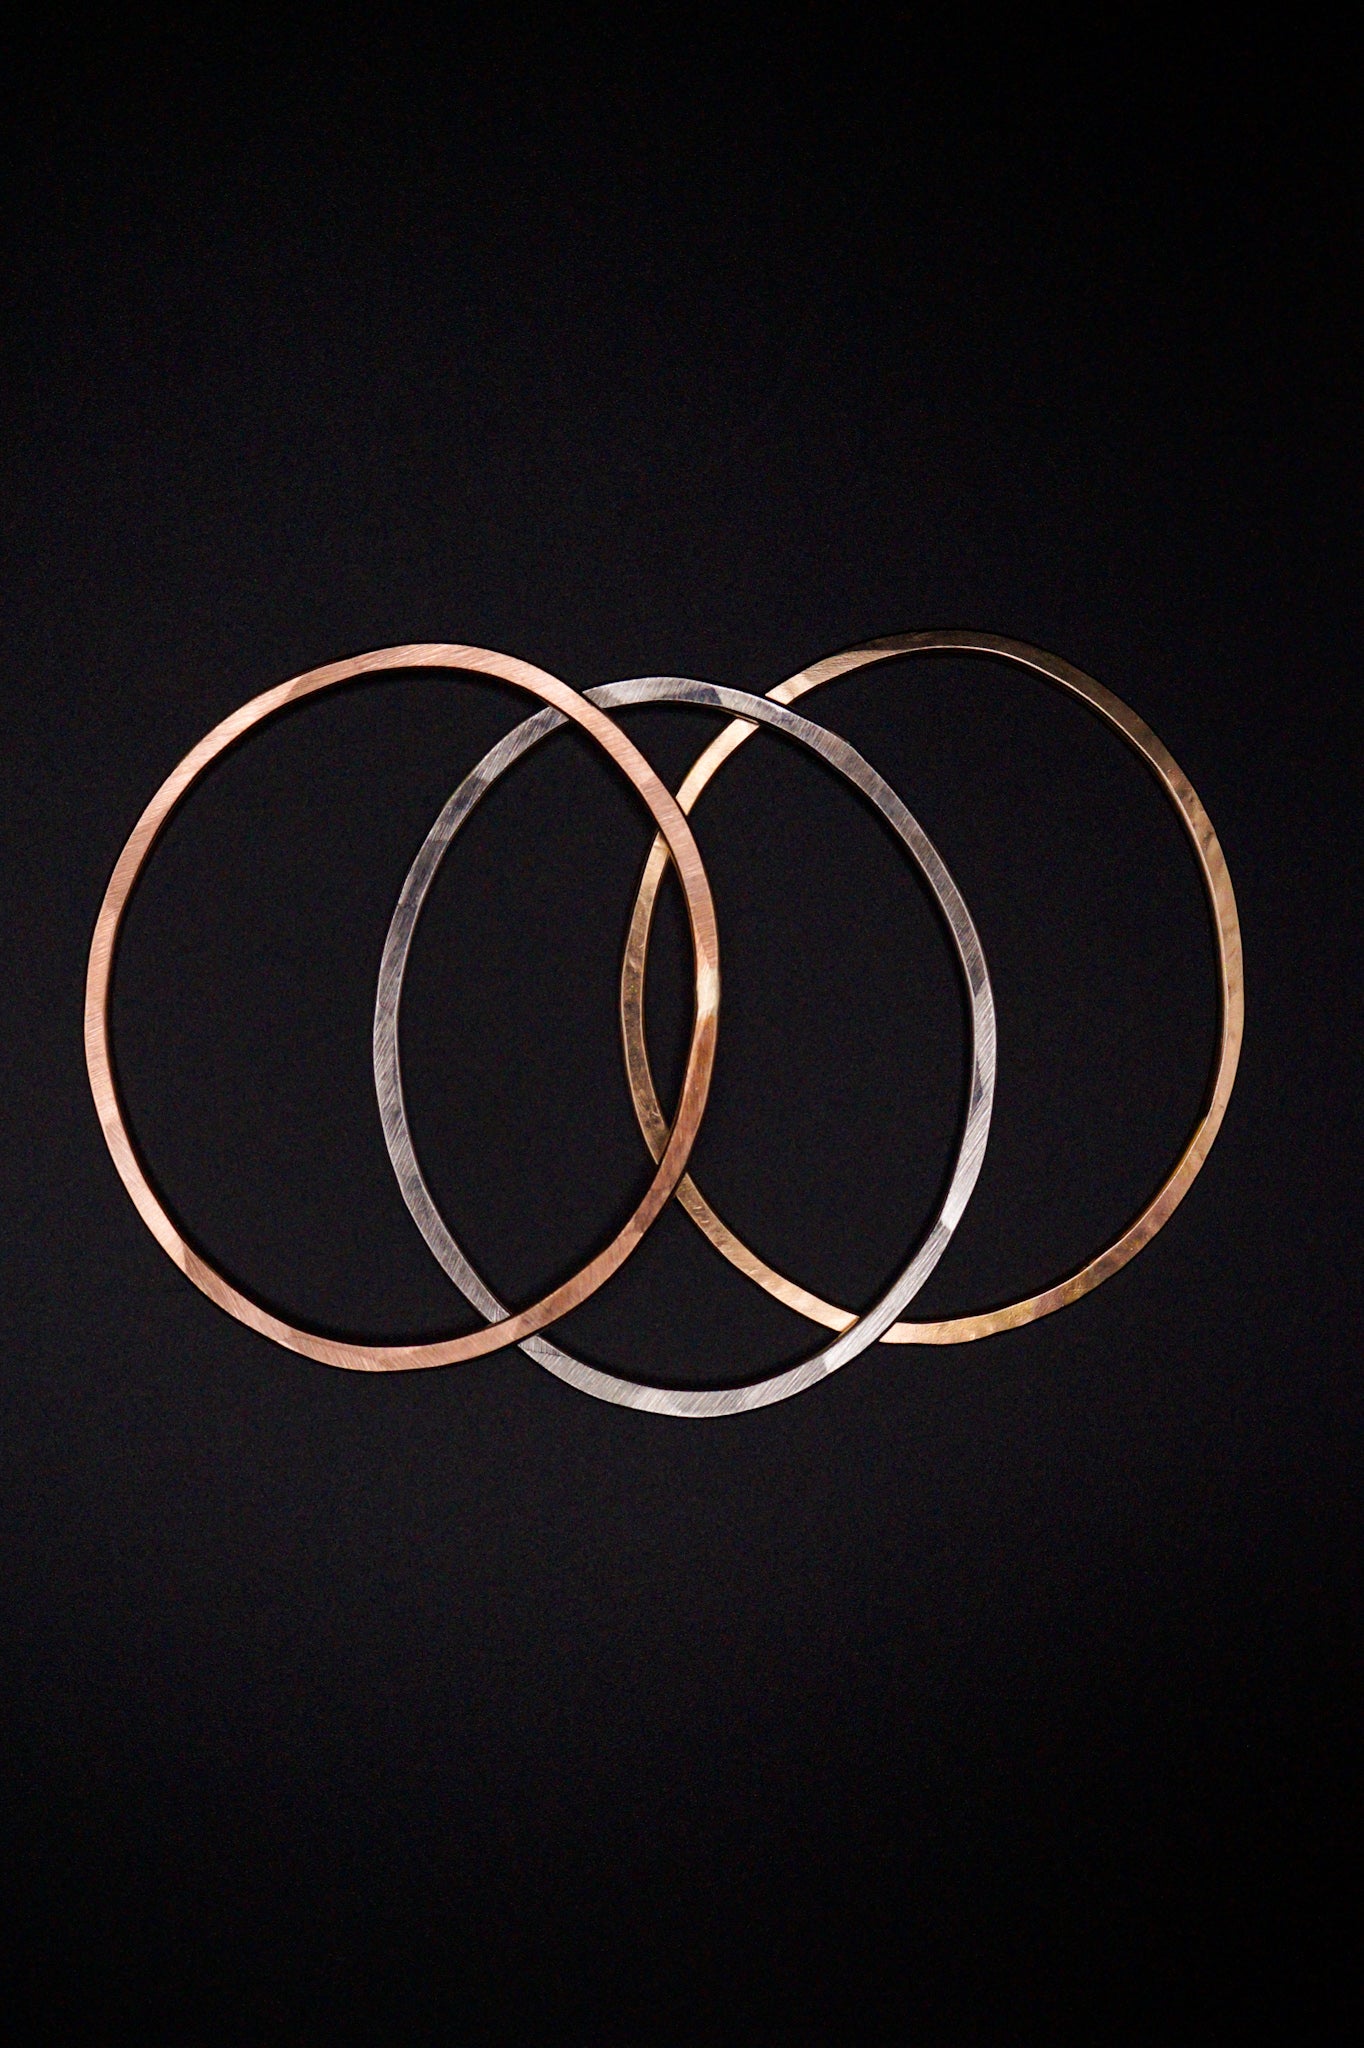 Large Circle Pendant in Gold Fill, Rose Gold Fill, or Sterling Silver